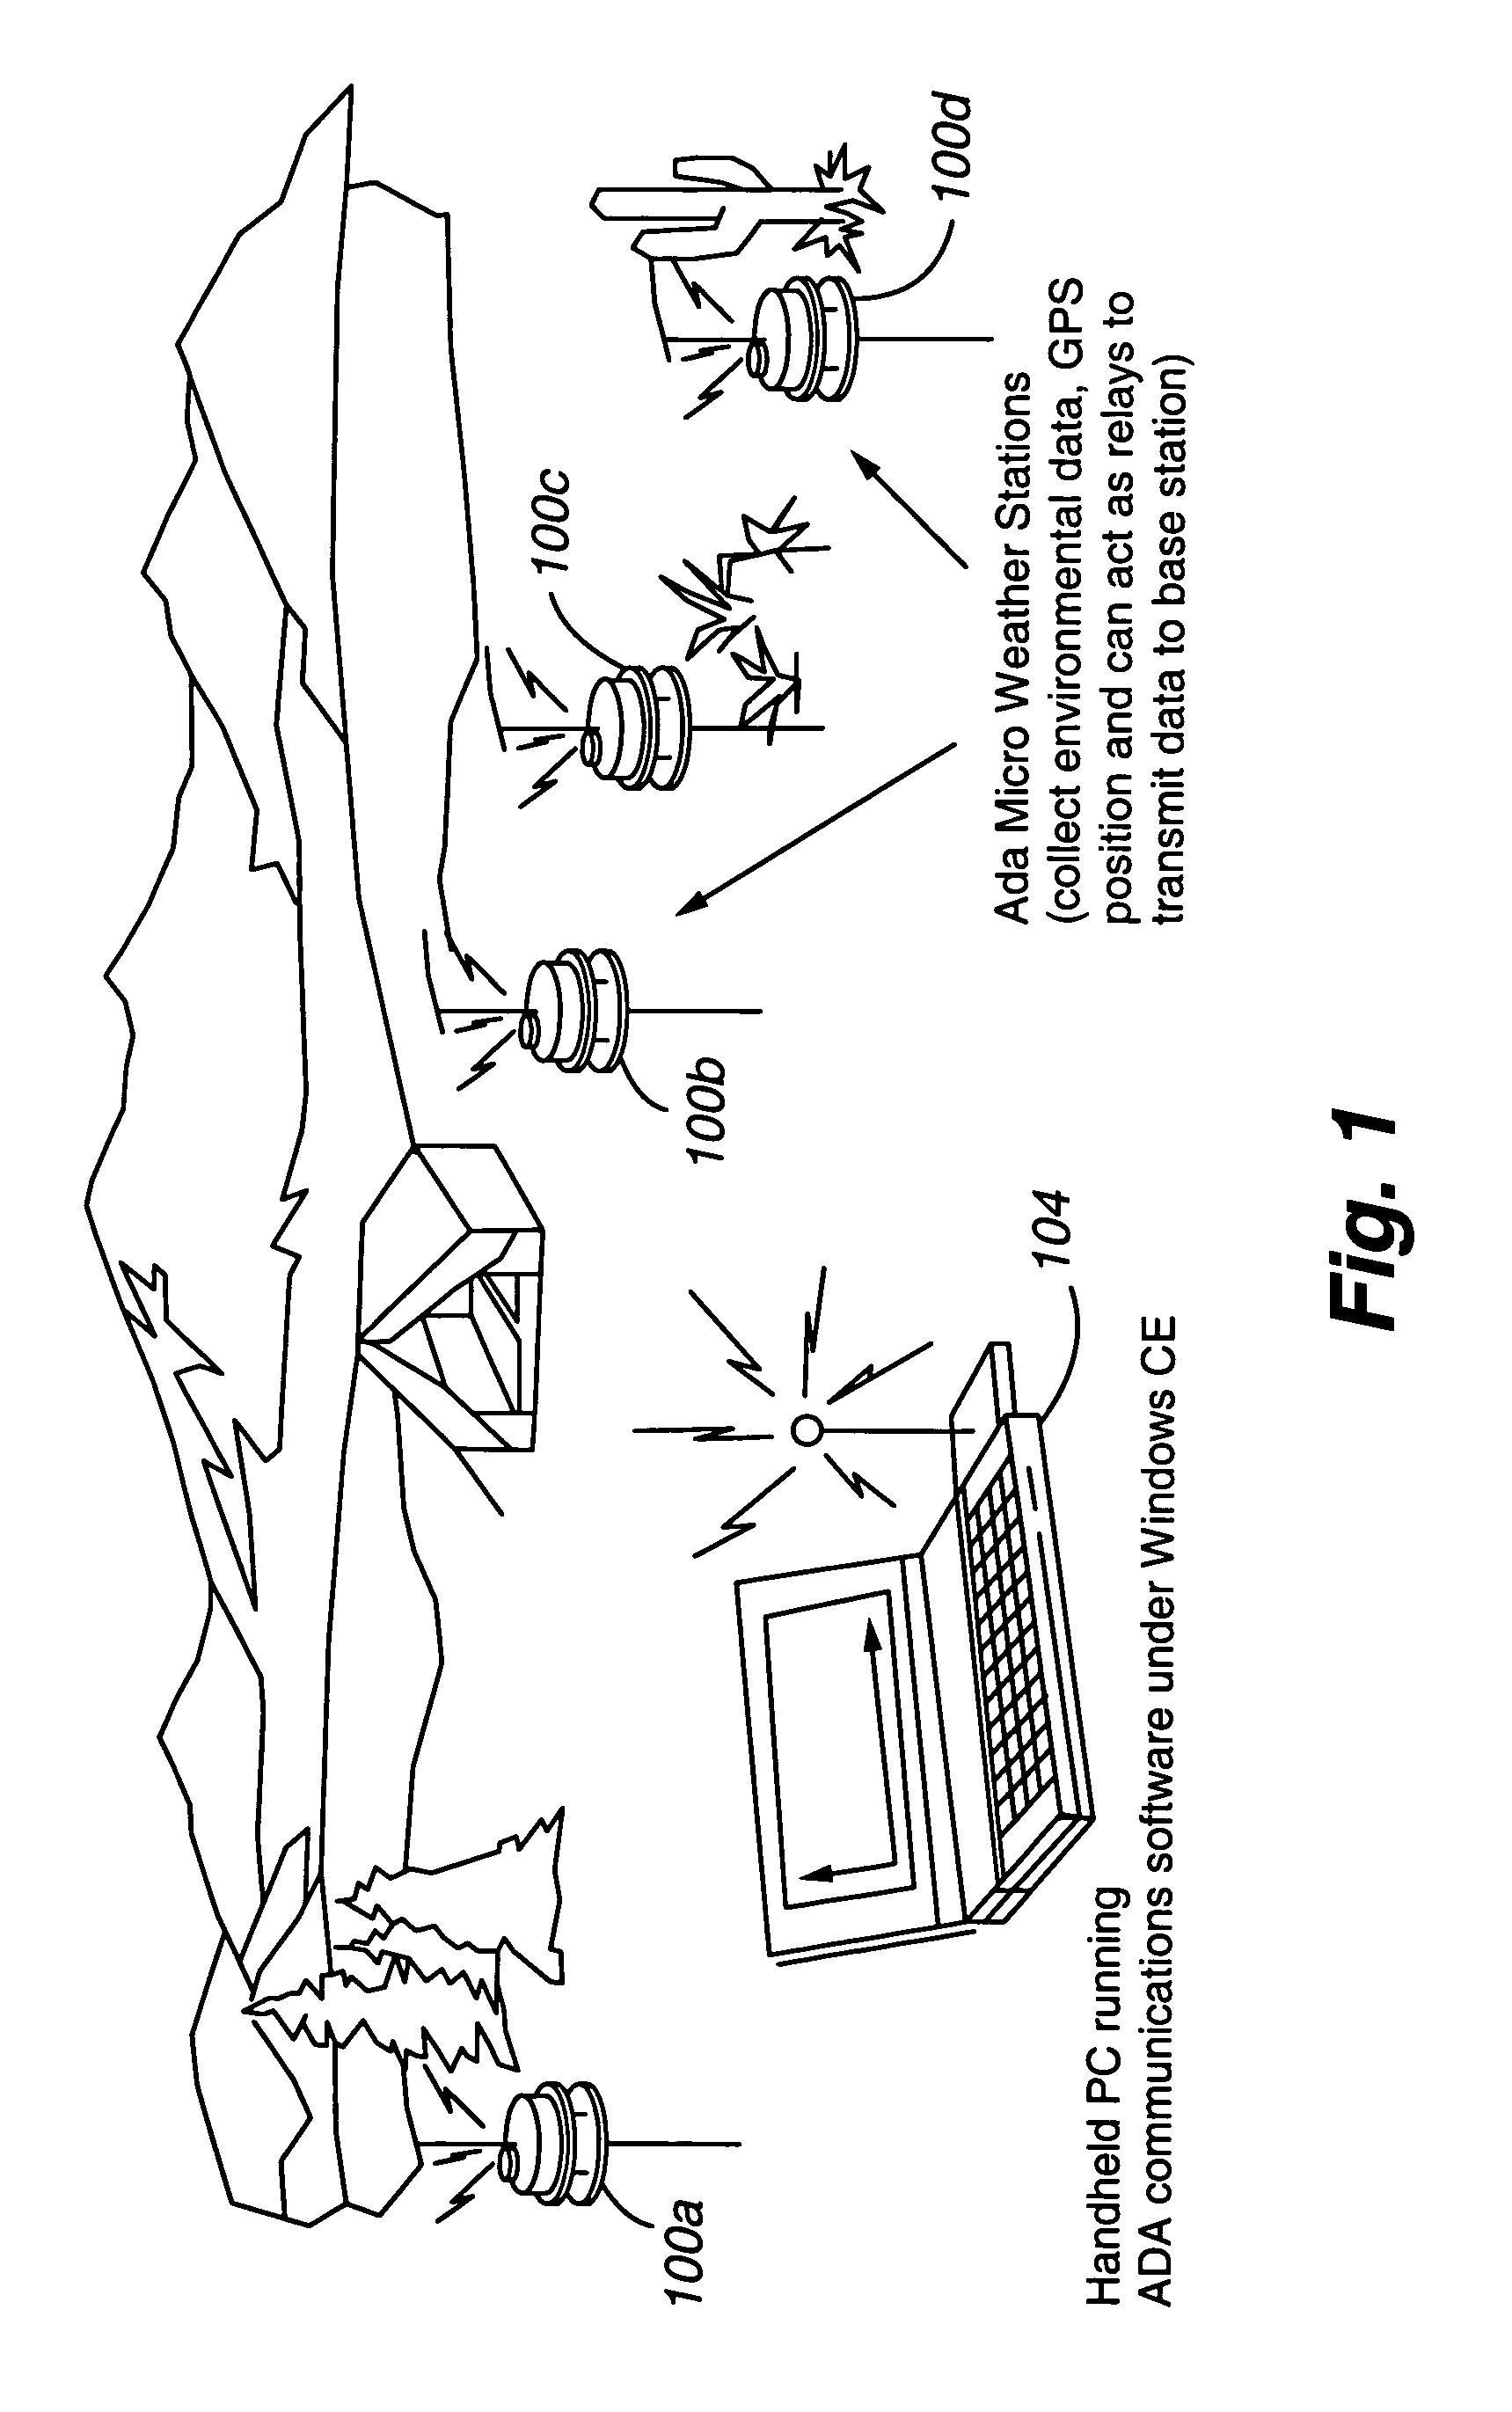 Geographically distributed environmental sensor system